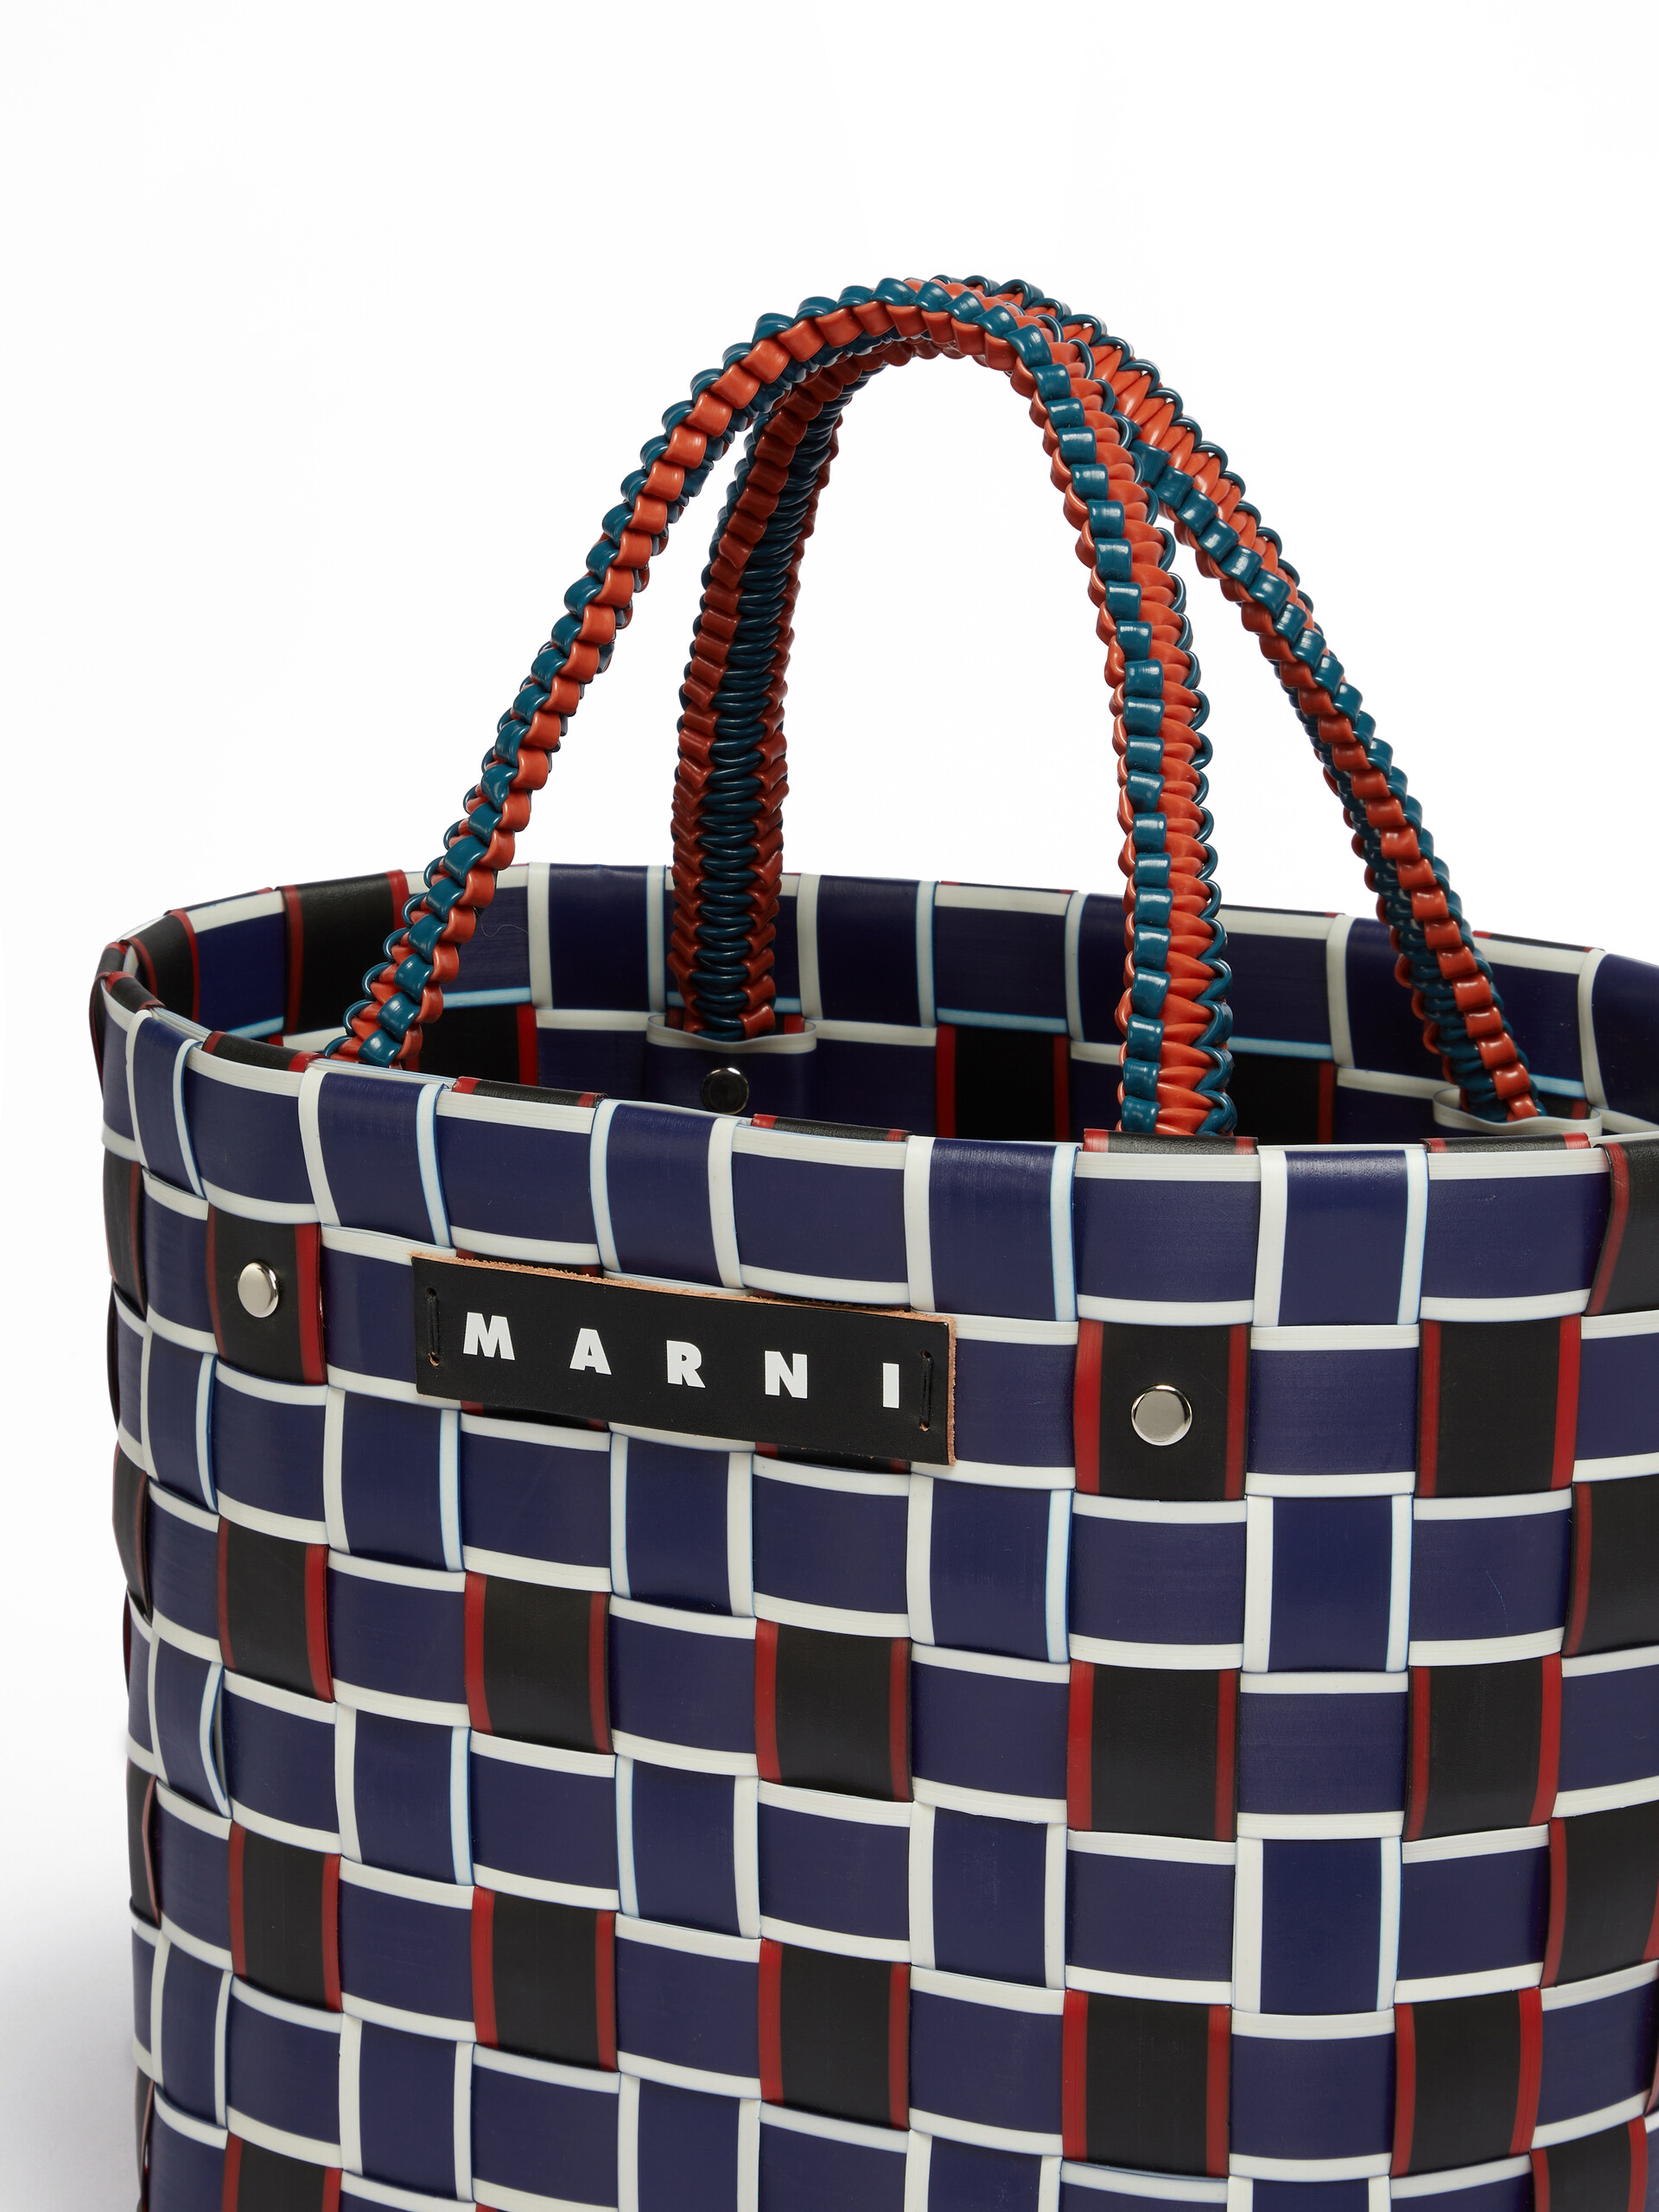 MARNI MARKET TAPE BASKET bag in blue and black woven material | Marni